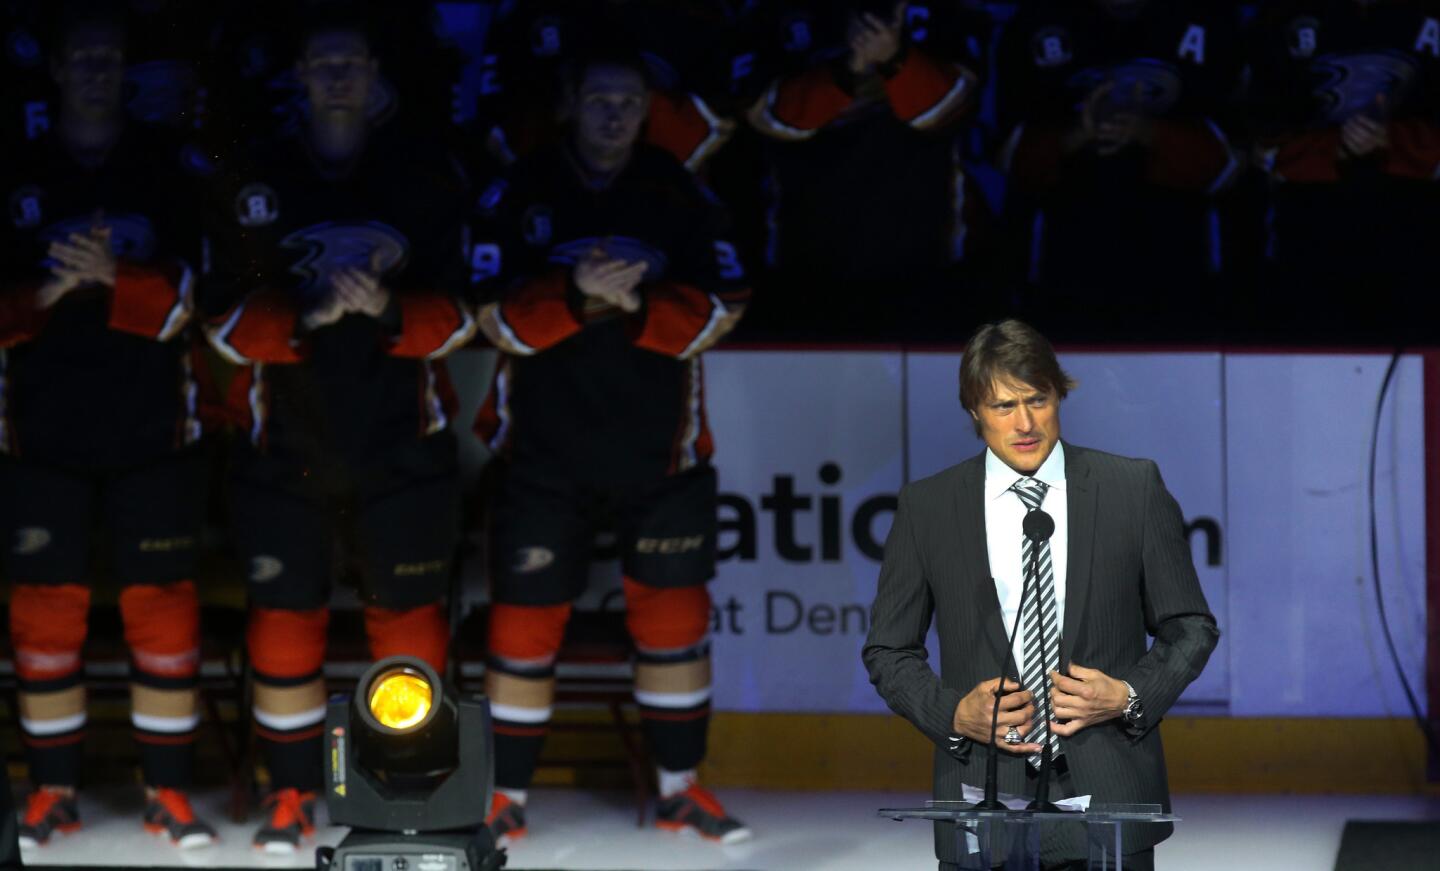 Former Ducks great Teemu Selanne speaks to the fans at Honda Center during a ceremony to retire his No. 8 jersey on Sunday evening in Anaheim.